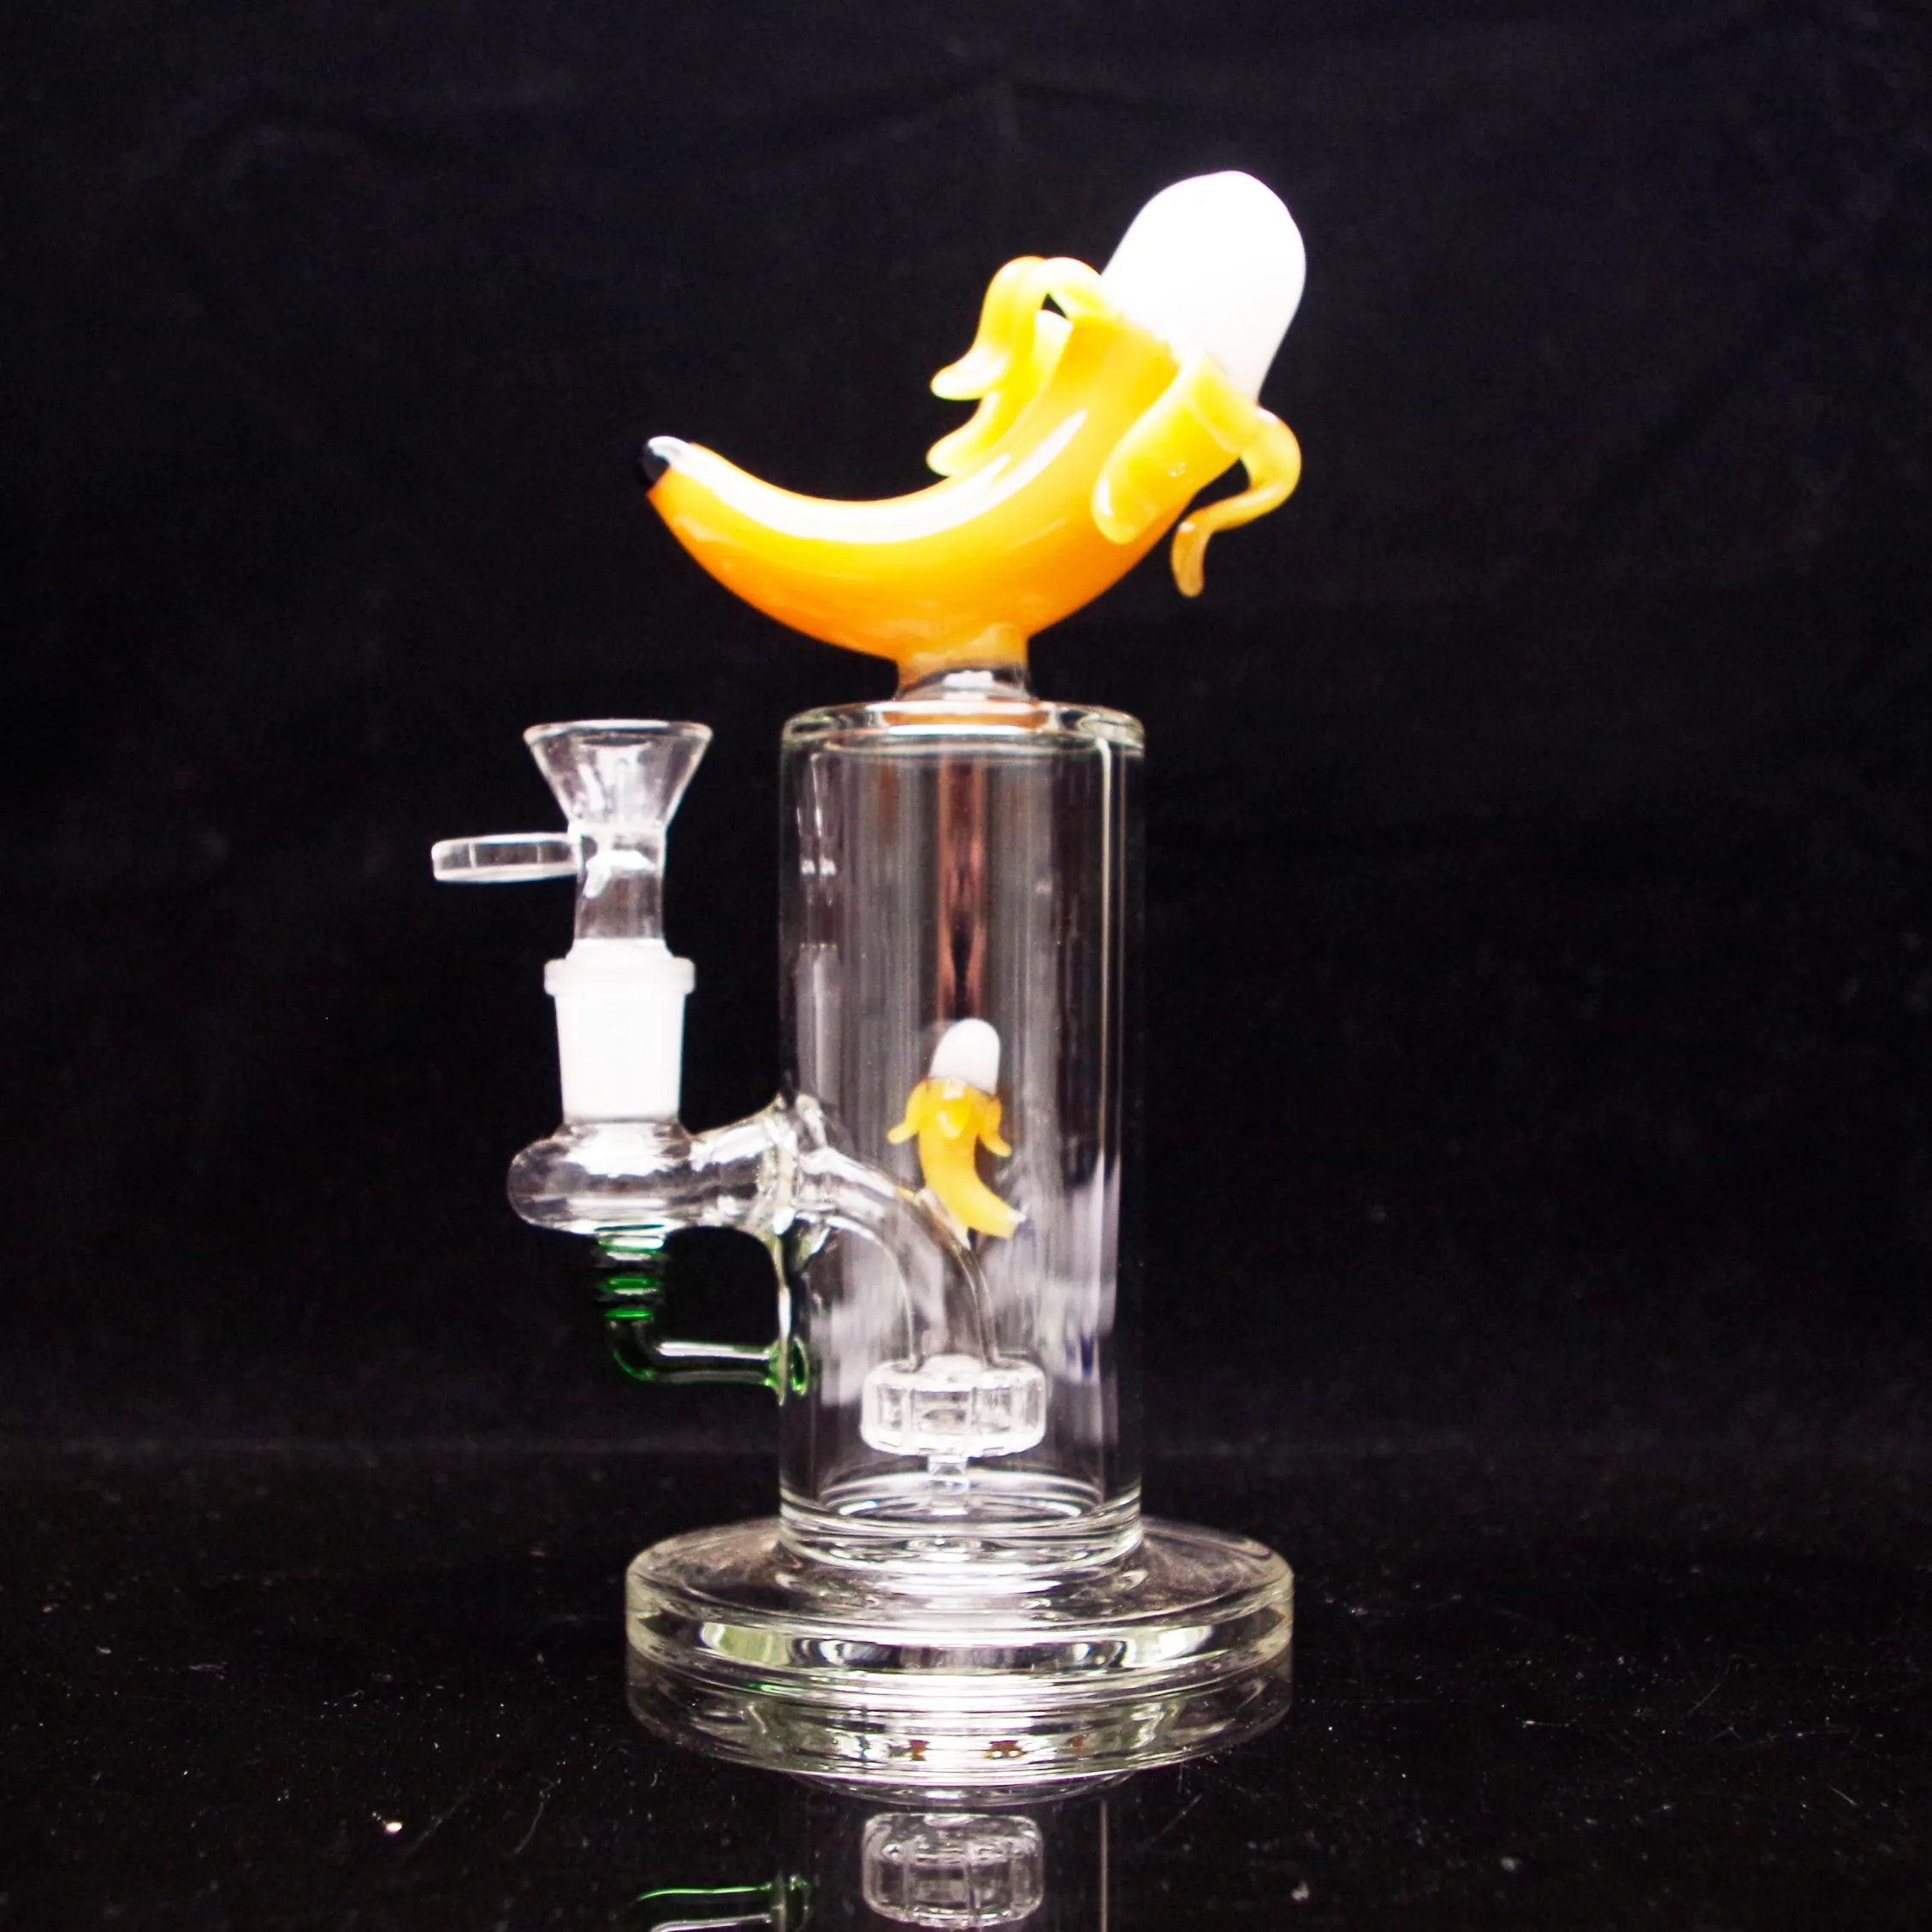 8 Inches Hookahs banana decoration Oil rig Glass Bong glass pipe with1 clear bowl included